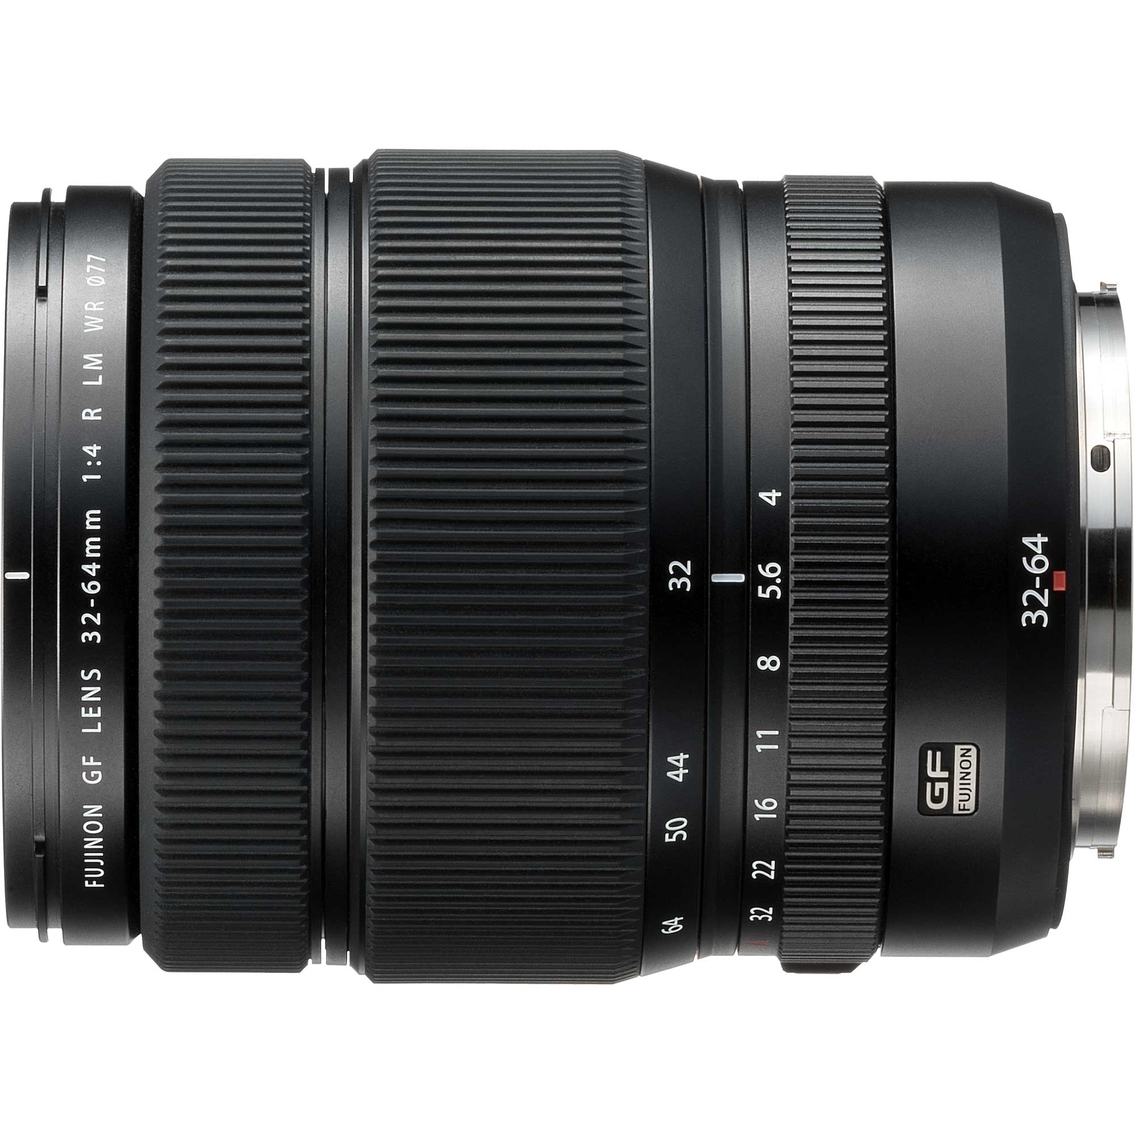 Fujifilm Fujinon GF 32mm to 64mm F4 R LM Weather Resistant Lens - Image 3 of 4